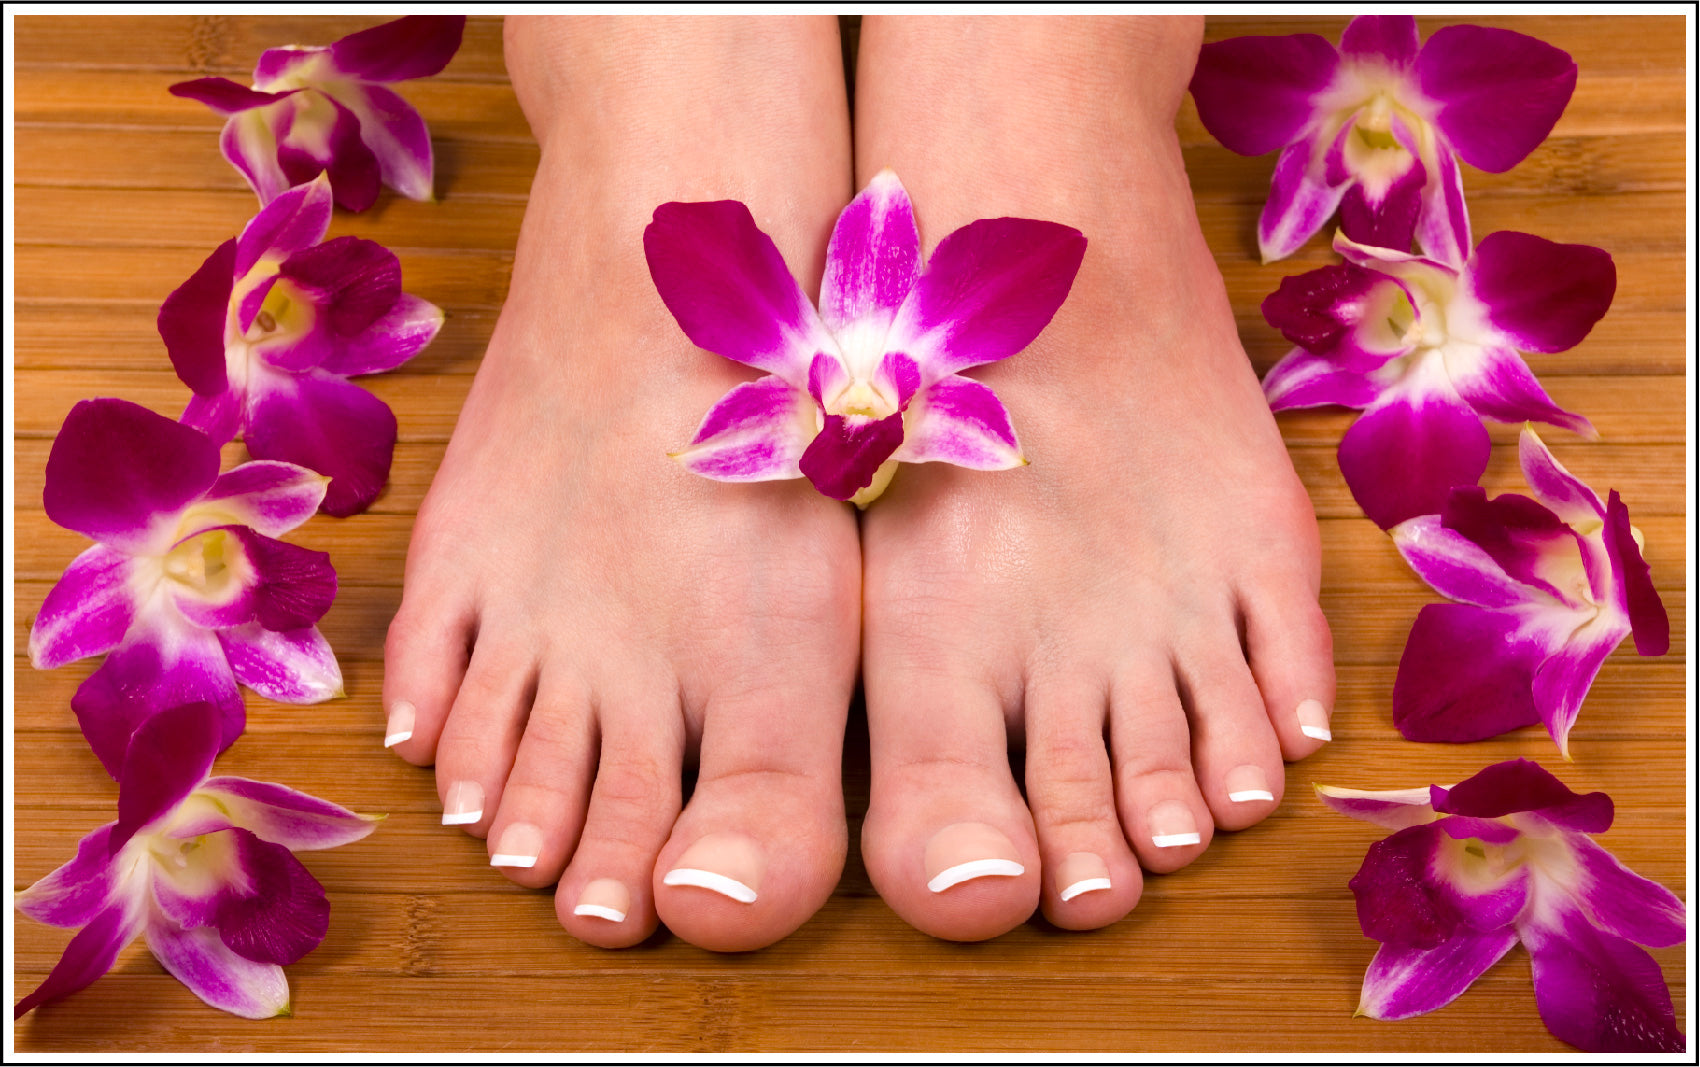 Caring For Your Feet: The Organic, Plant-Based Way And Non Toxic Way.